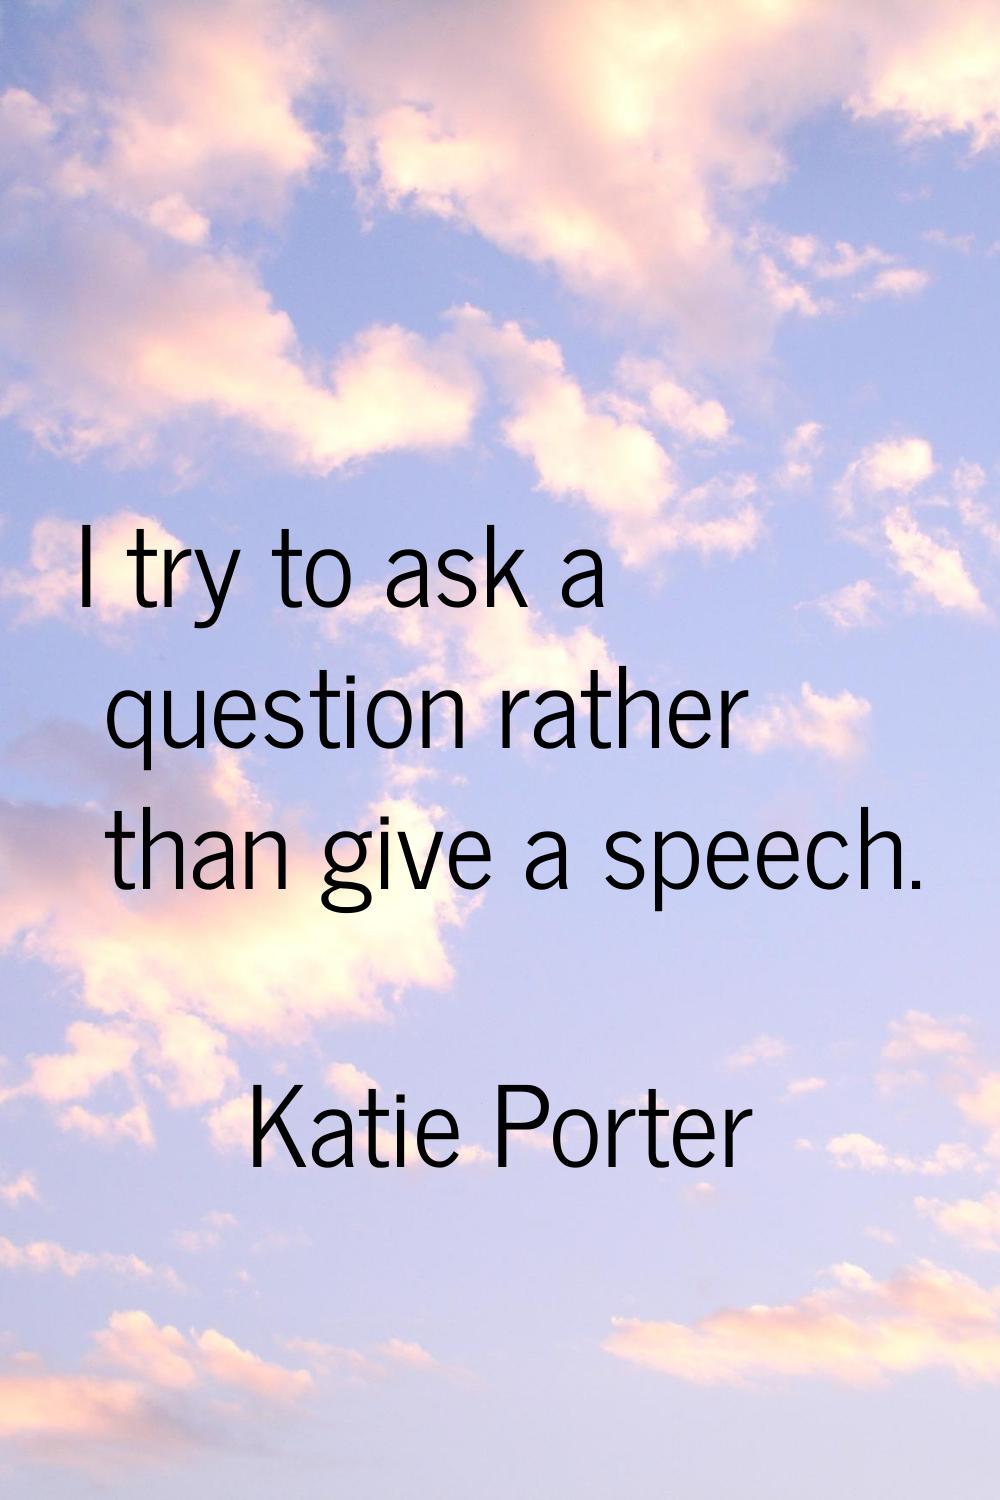 I try to ask a question rather than give a speech.